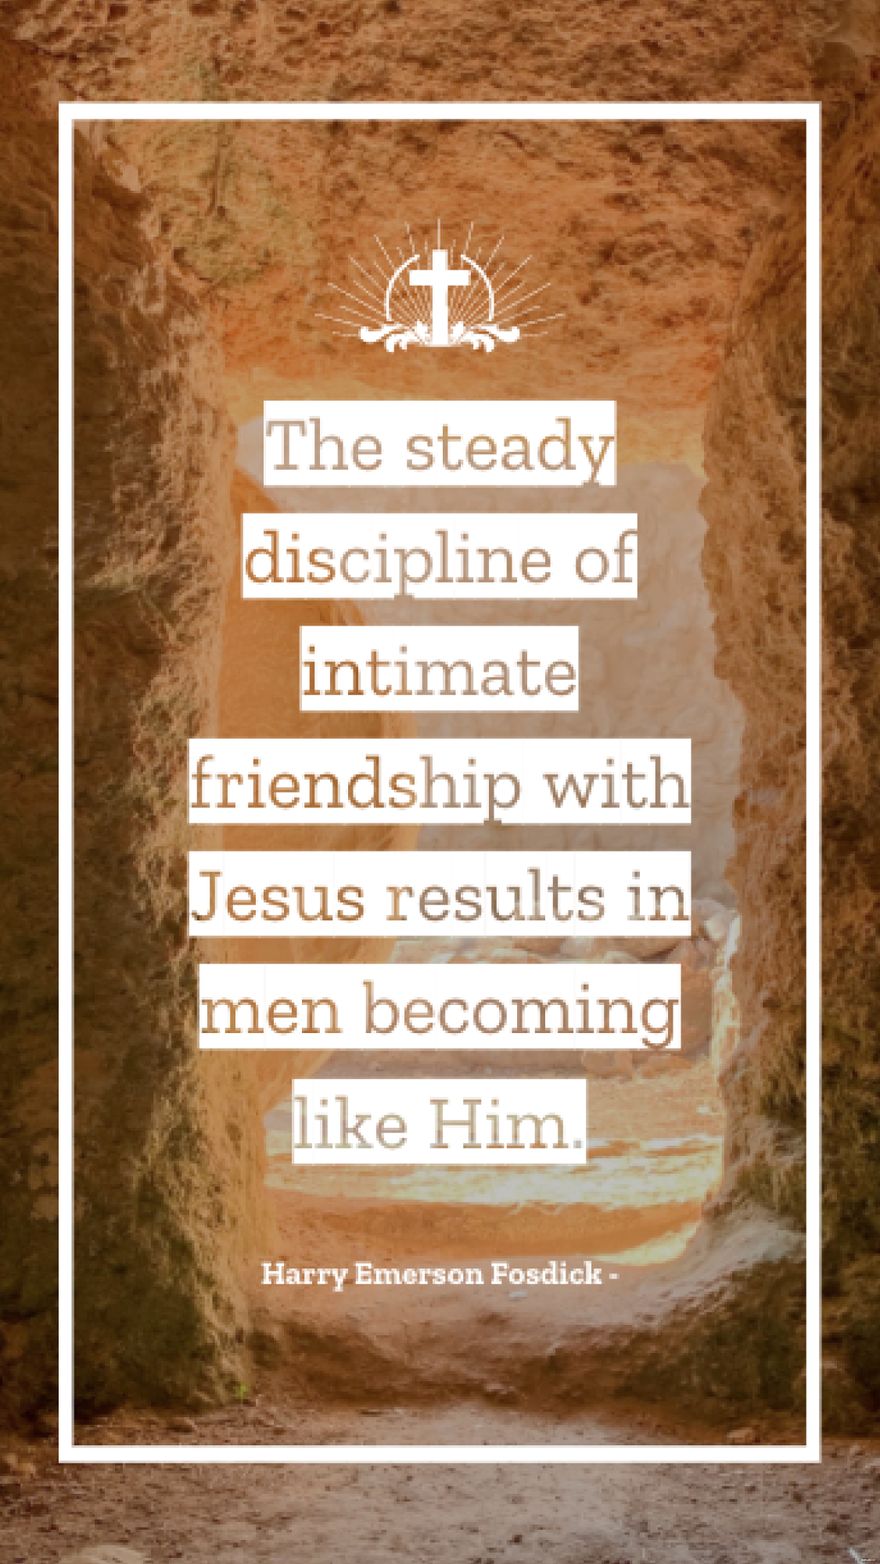 Free Harry Emerson Fosdick - The steady discipline of intimate friendship with Jesus results in men becoming like Him. in JPG